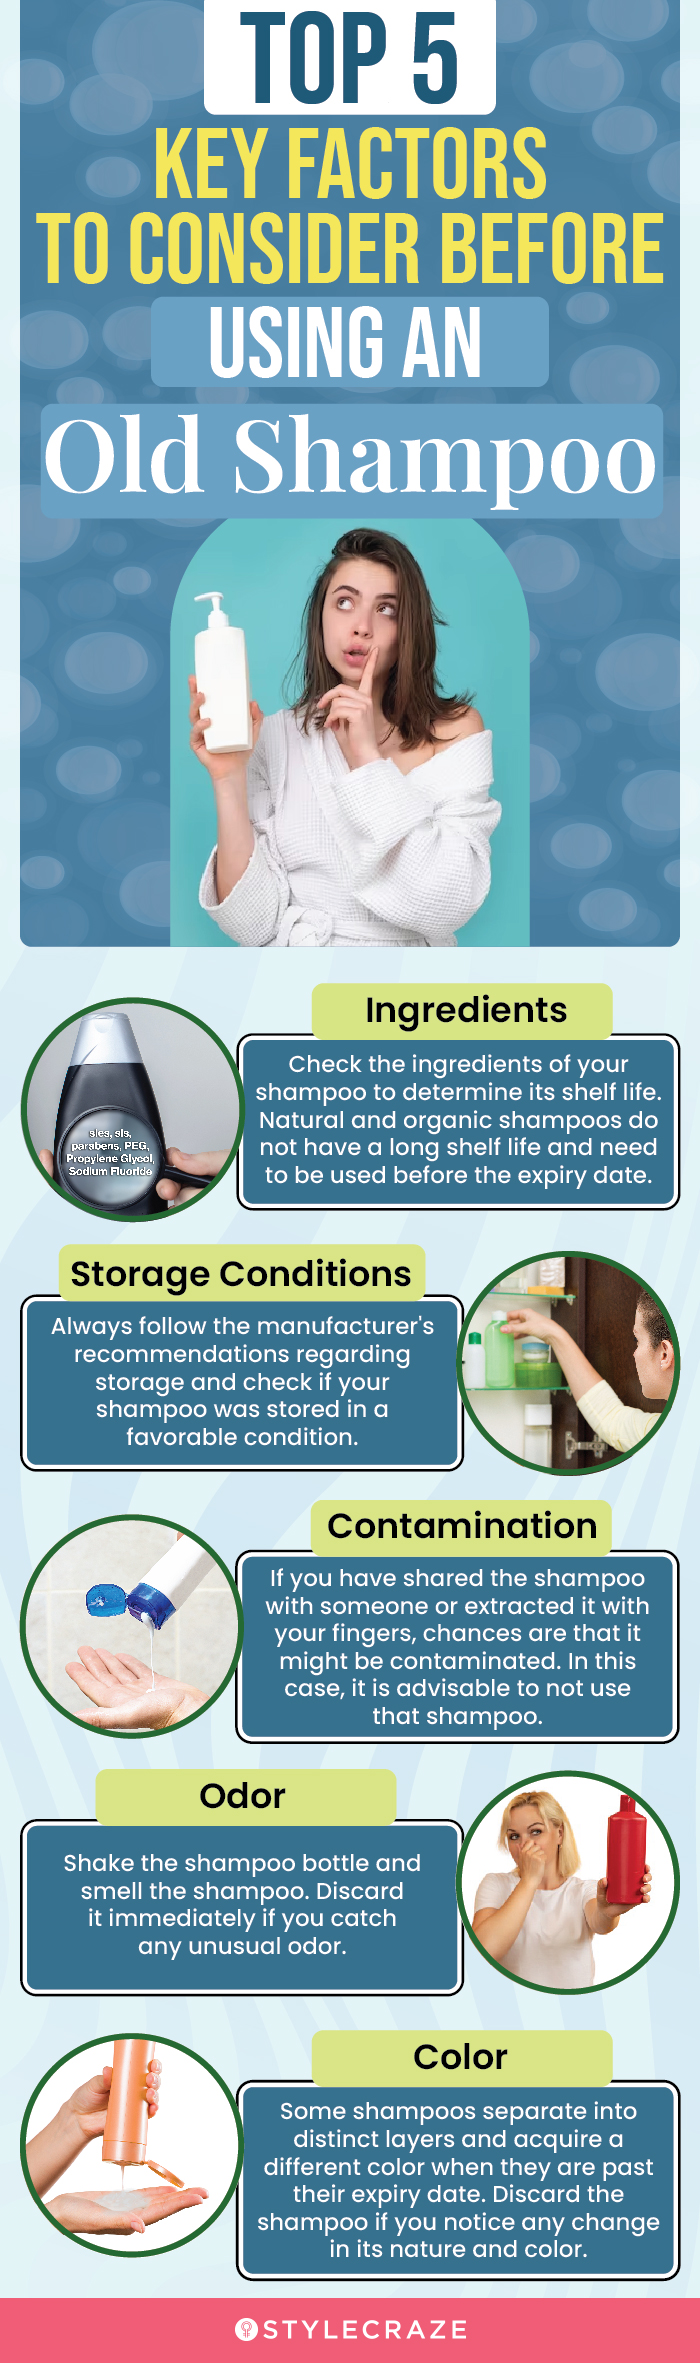 top 5 key factors to consider before using an old shampoo (infographic)